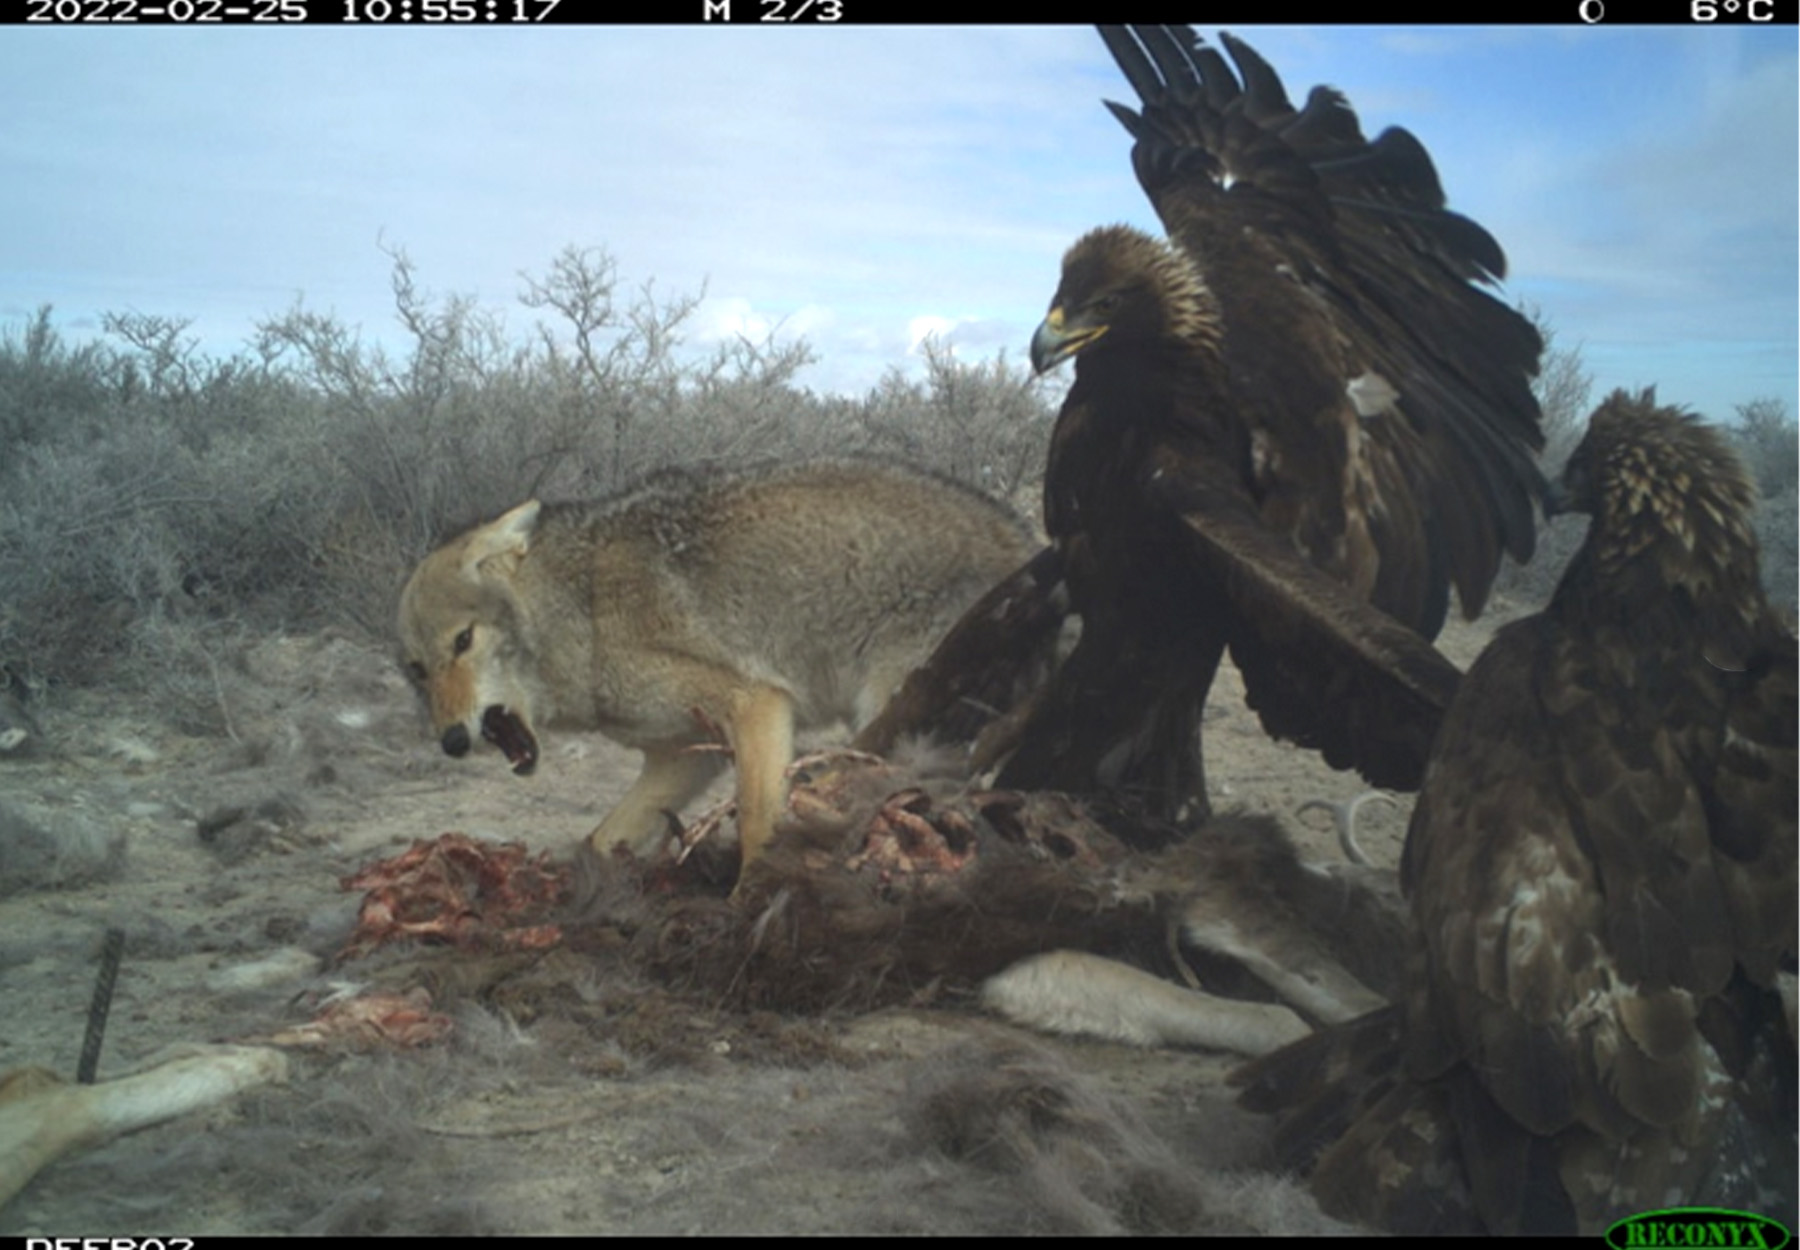 Two golden eagles, a coyote, and a deer carcass.